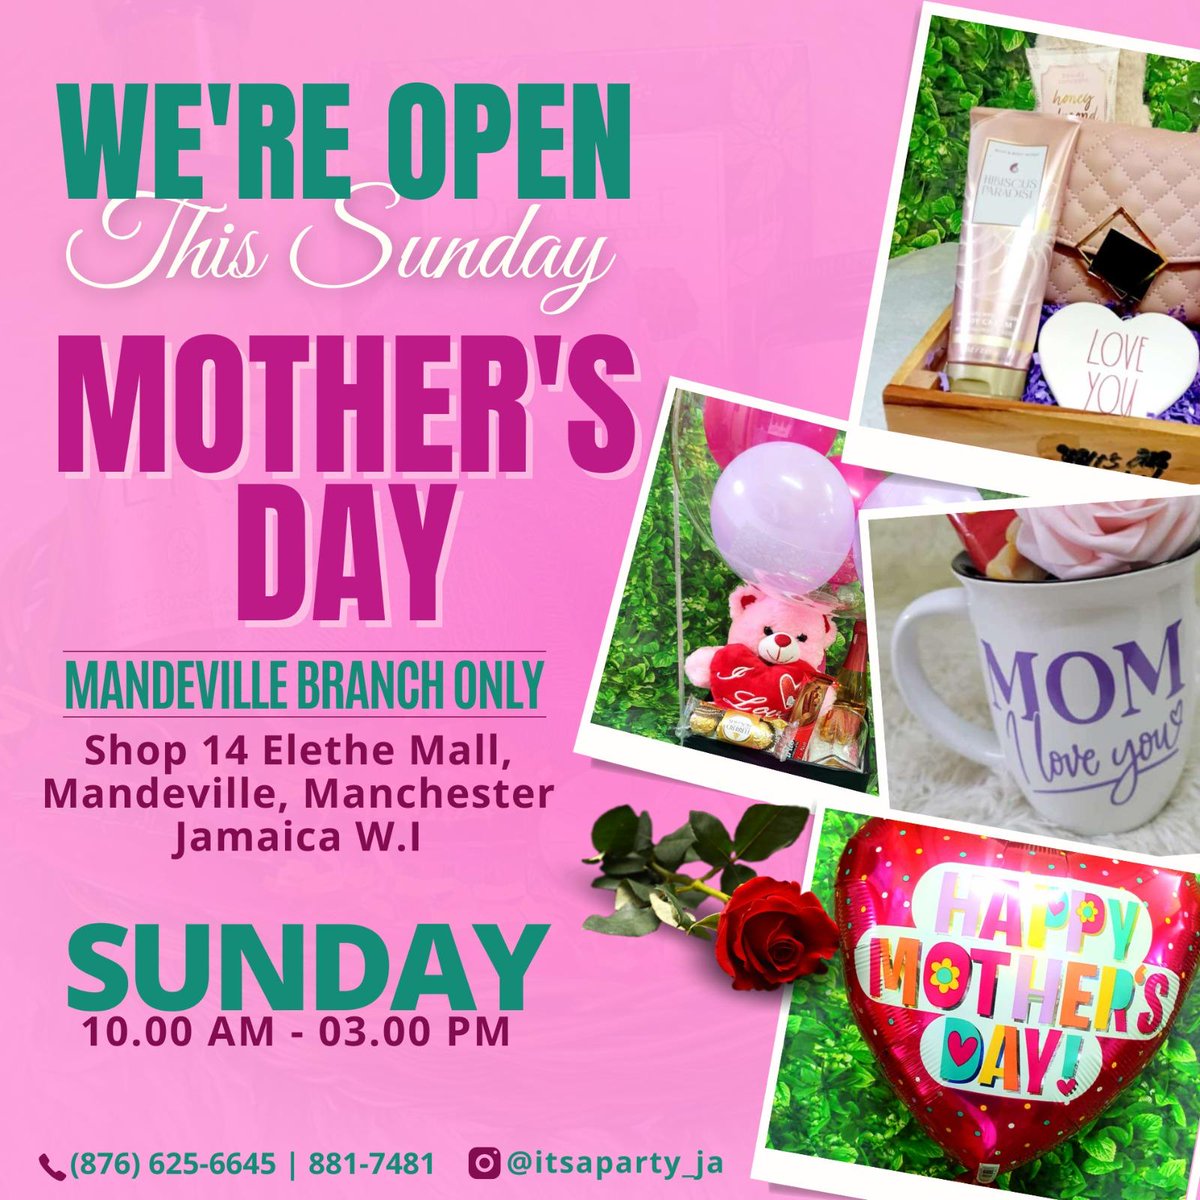 Don't miss out this Mother's Day! 🌷 Swing by today and pick up the perfect gift to show her she's loved. 💖 

.
.
.
#ItsApartyJa #MotherdaysBalloon
#PartyStore #giftballoon #foilnumbers
#giftideasjamaica #MothersDaygiftset 
#heliumballoons #MothersdayGiftbaskets